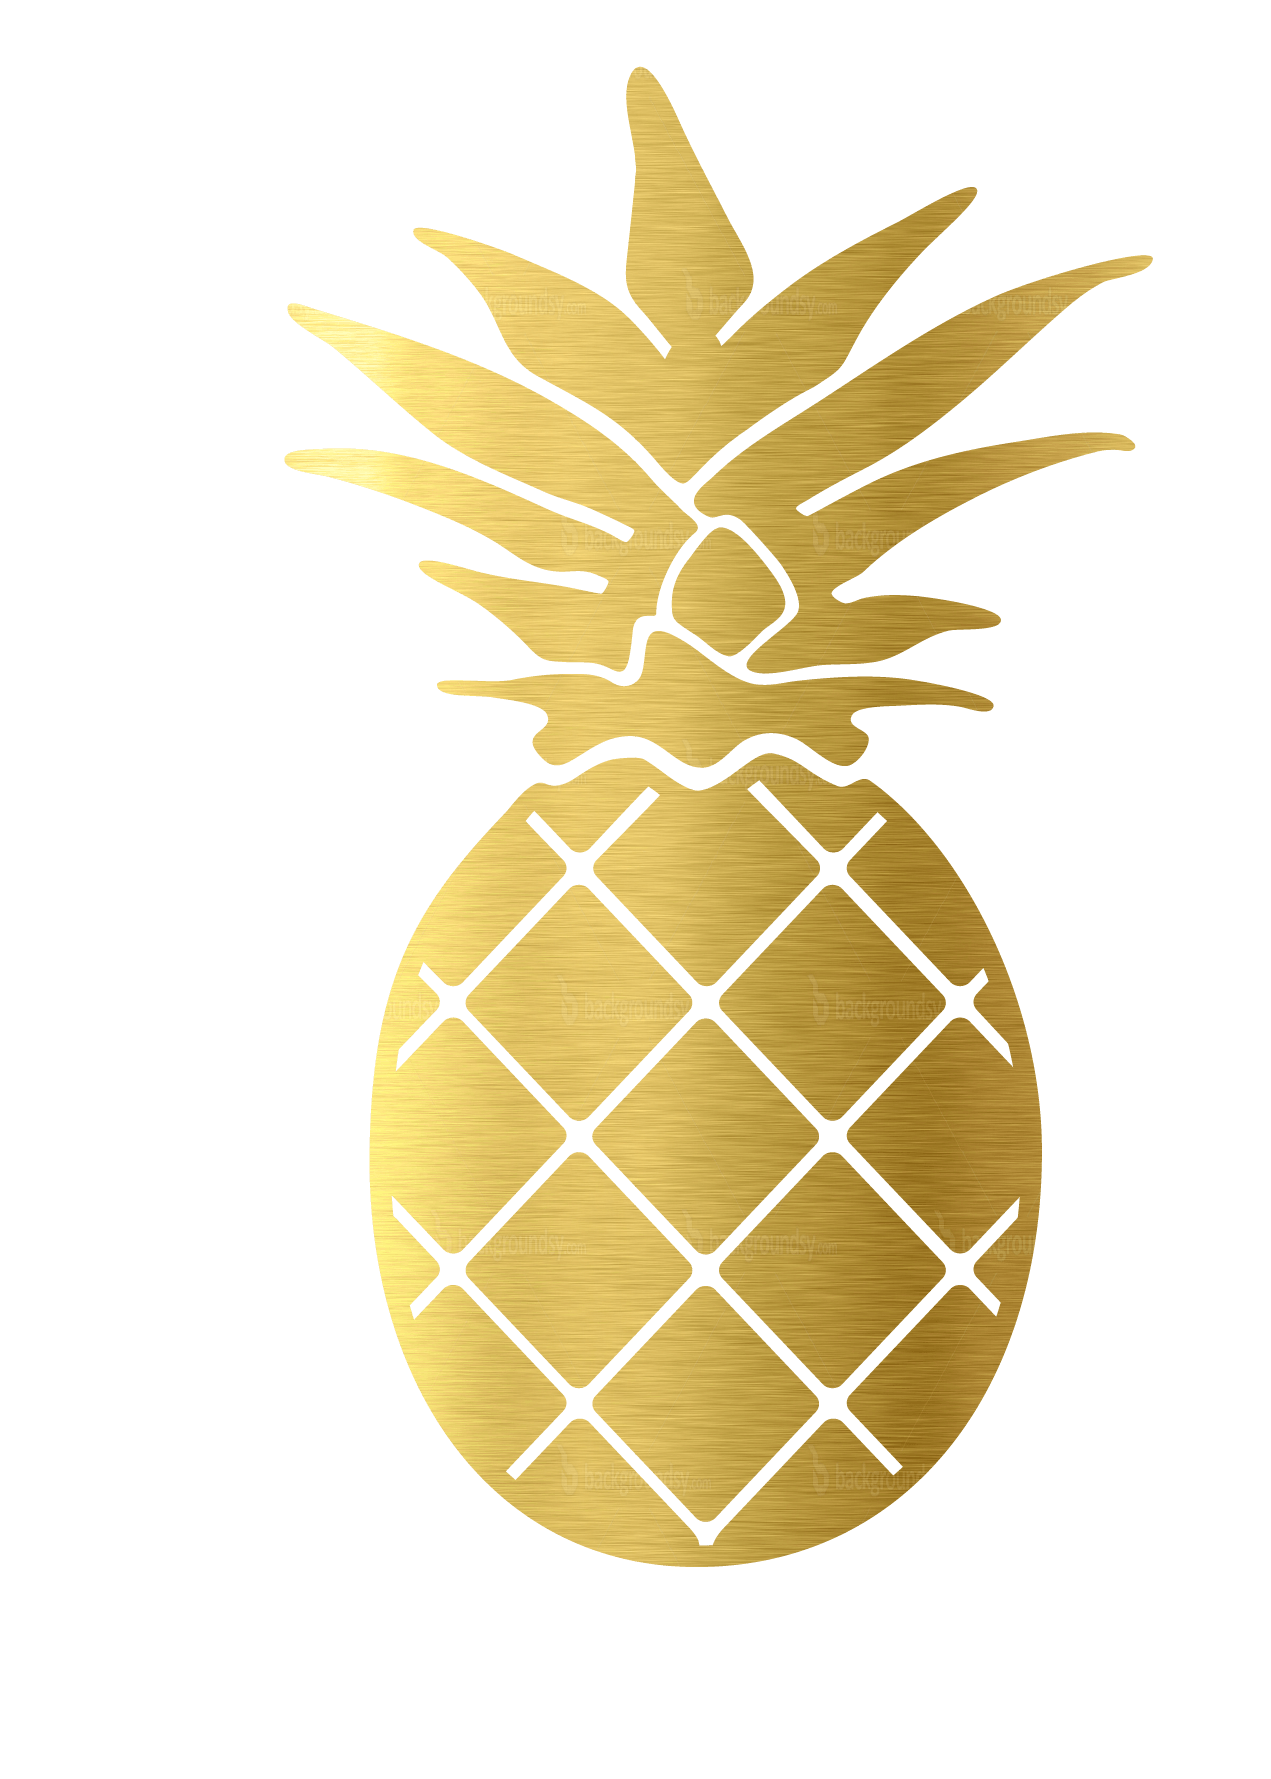 Decals stickers palmetto moon. Outline clipart pineapple